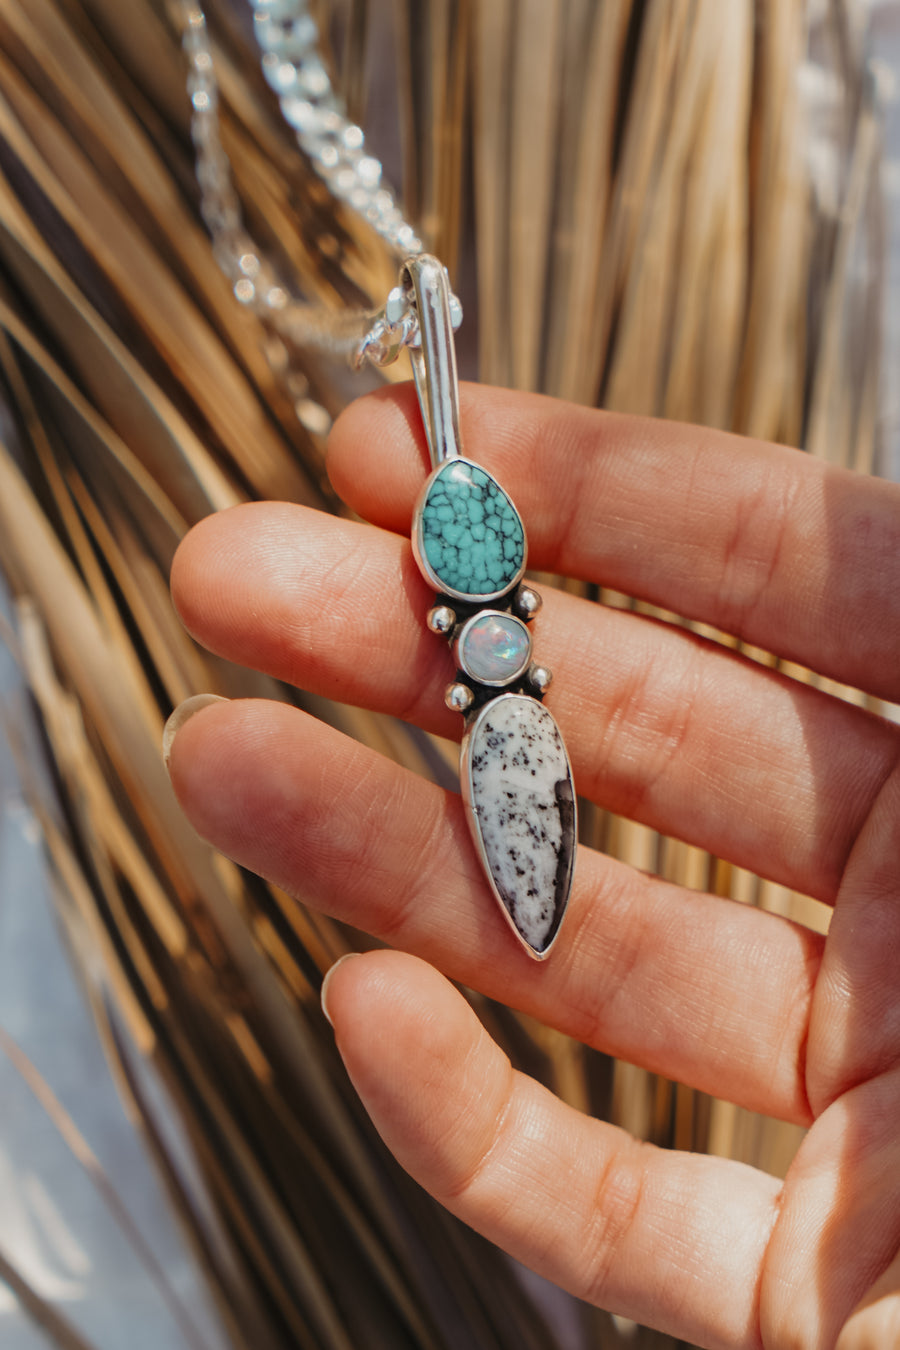 The Chrysalis Necklace in Dendritic Agate, Hubei Turquoise, & Boulder Opal Doublet